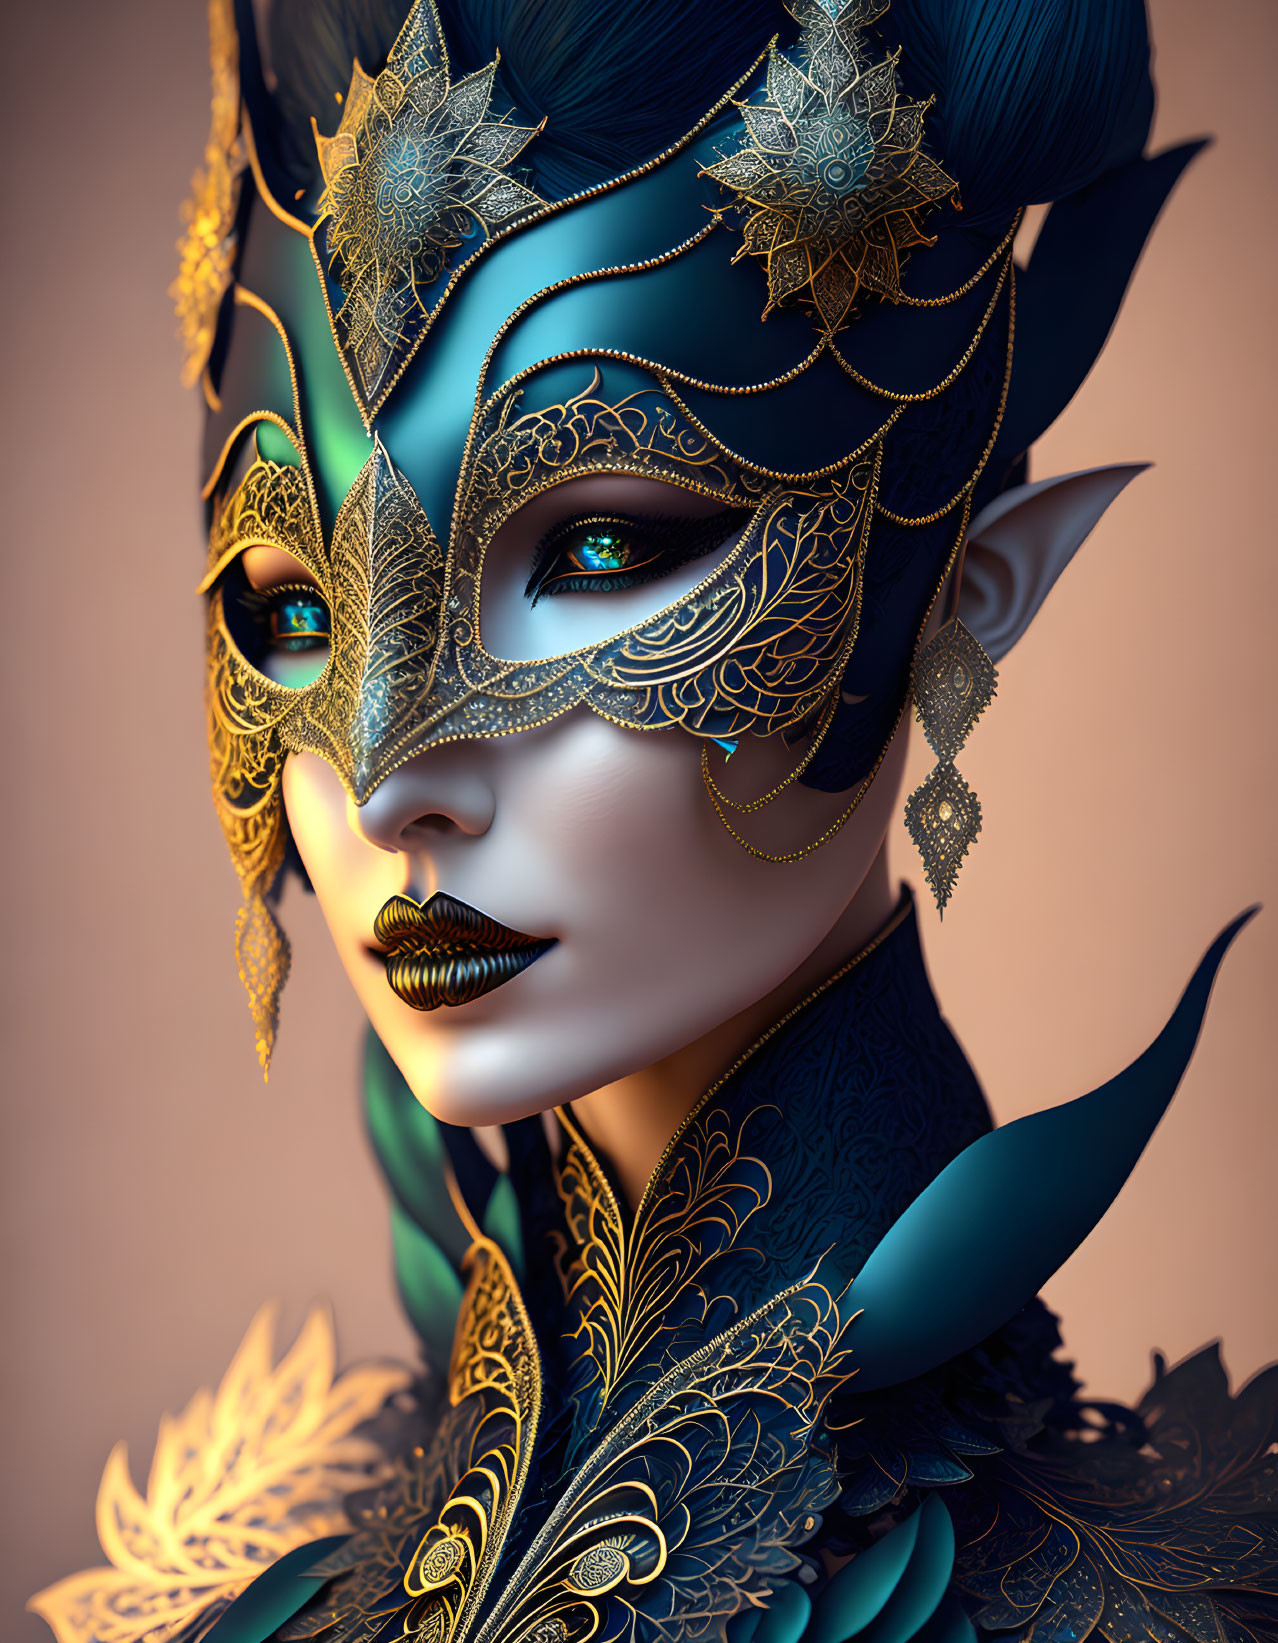 Digital character with golden mask and blue skin, adorned with ornate headpieces